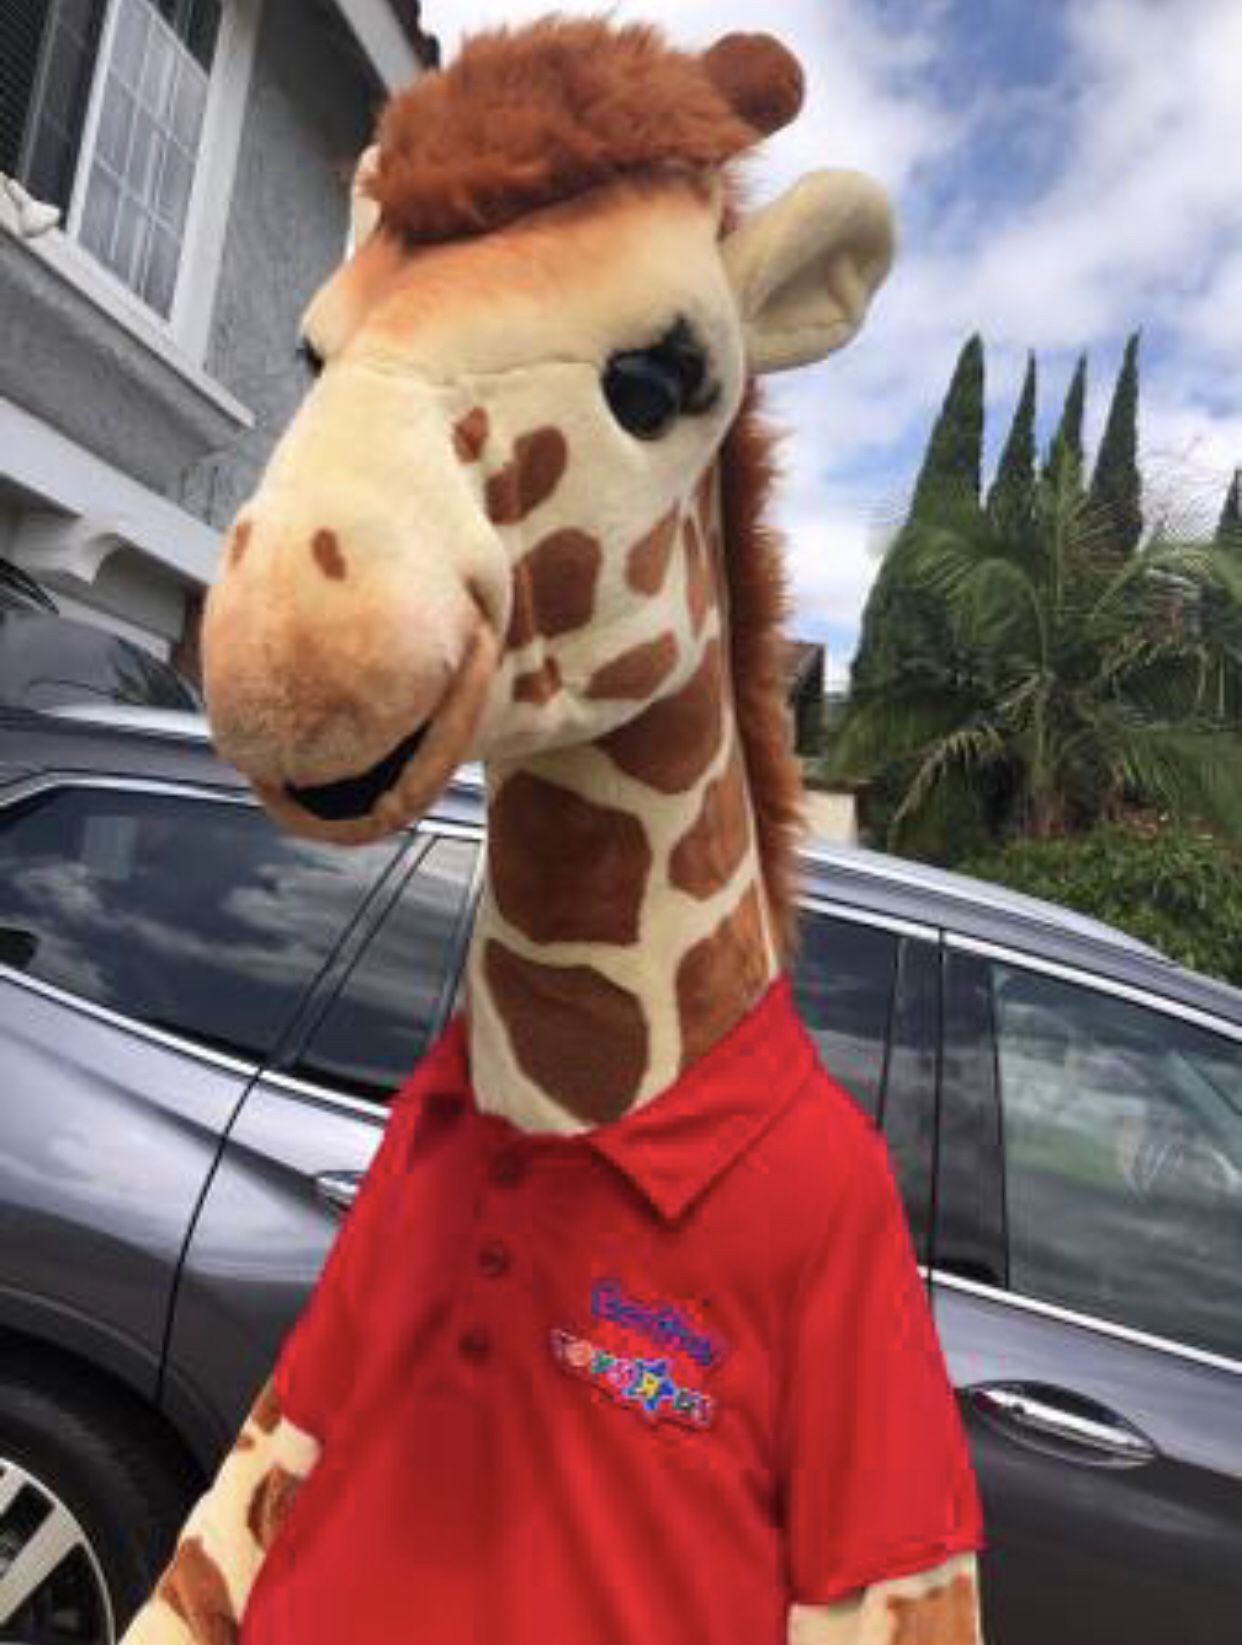 Toys R Us - Geoffrey the Giraffe Official Mascot Costume - Extremely Rare! Halloween